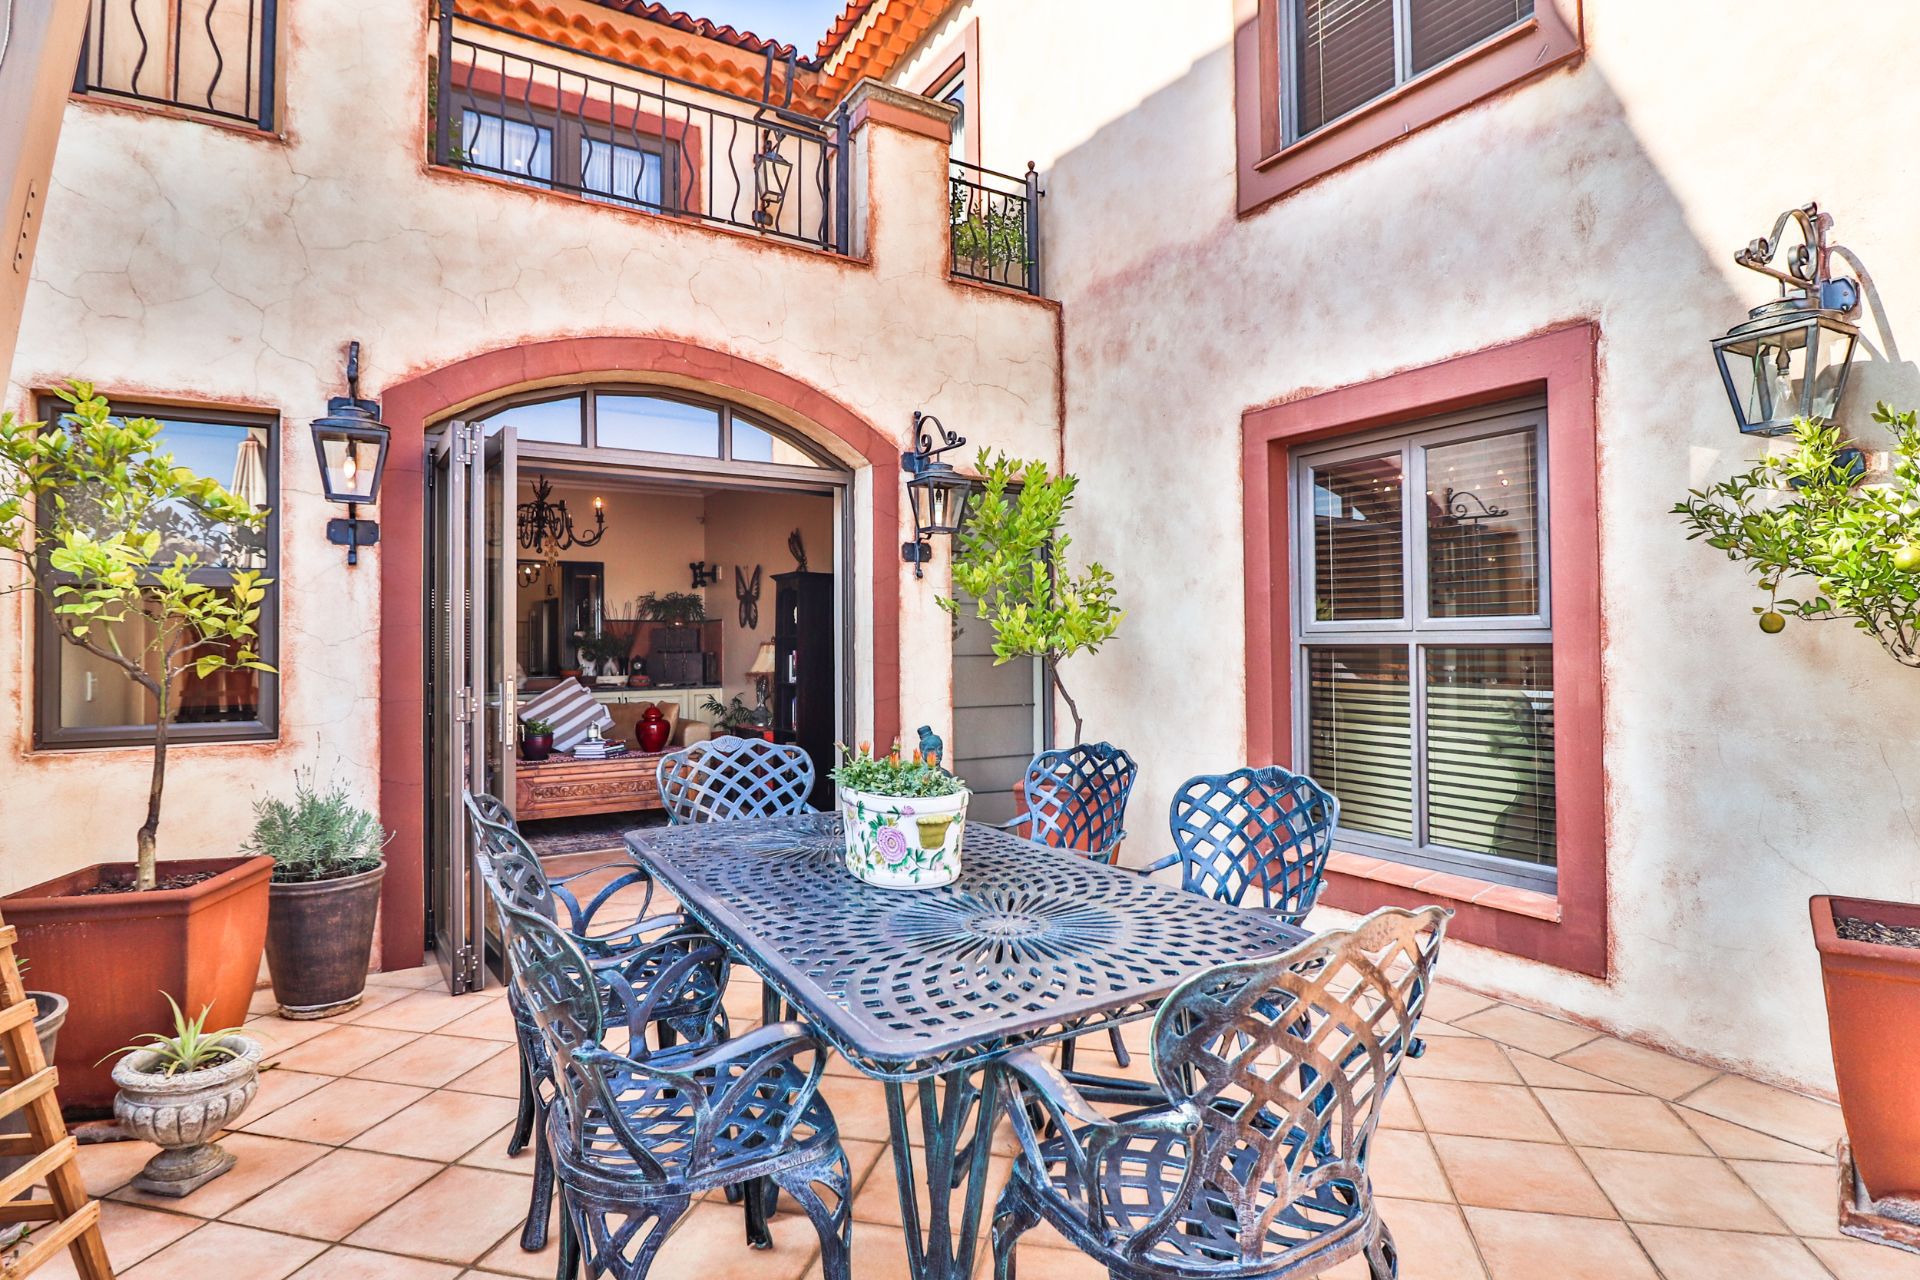 House in Port Provance - Attractive patio